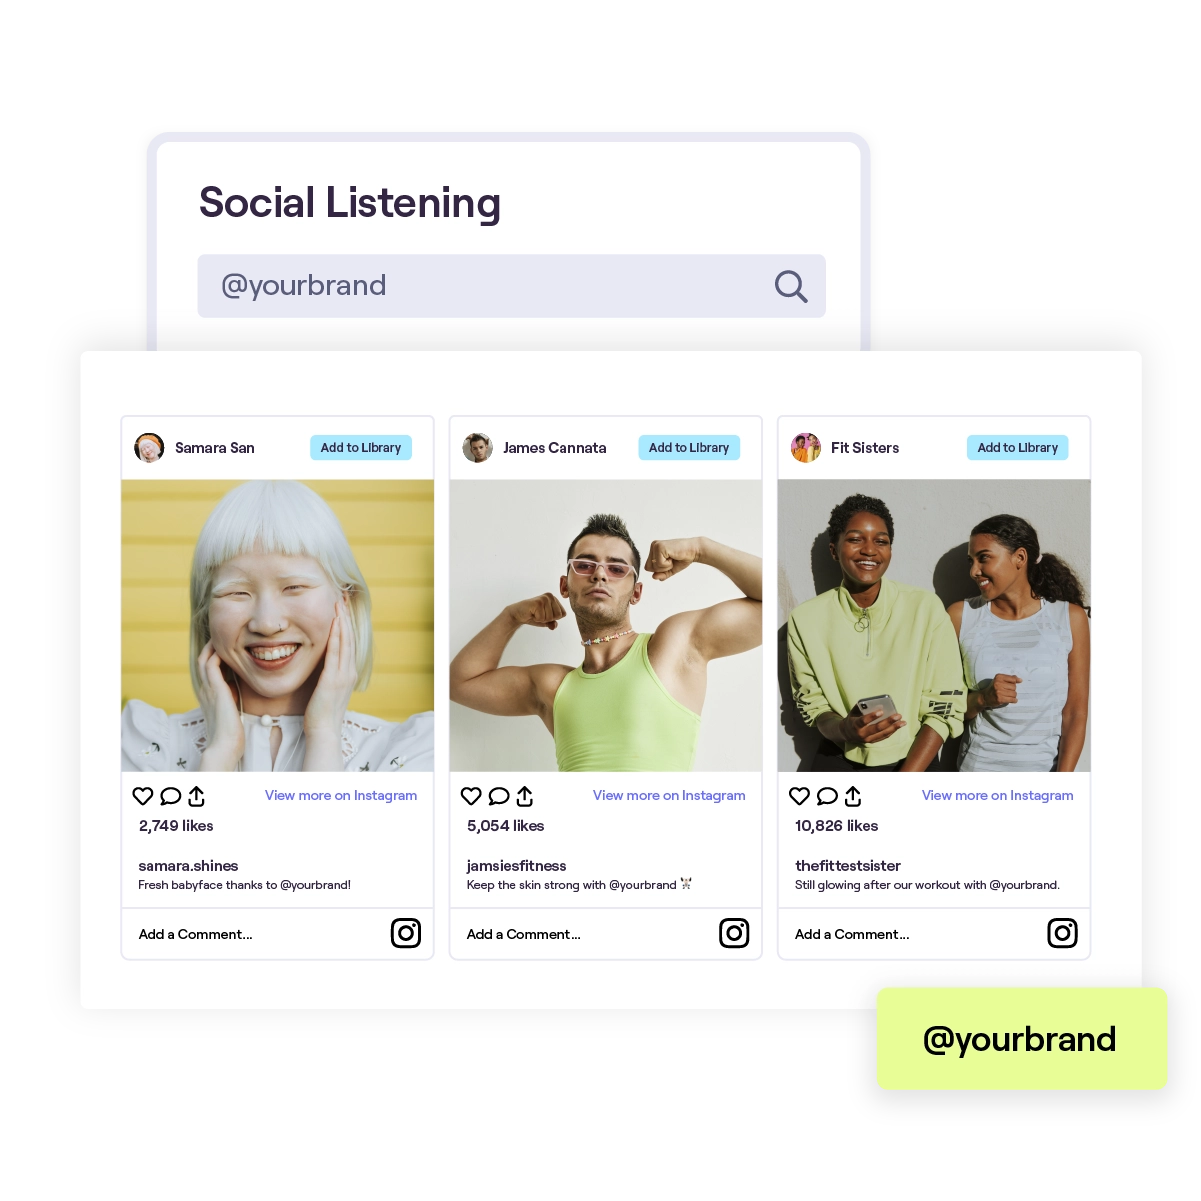 stylized images of GRIN's social listening function